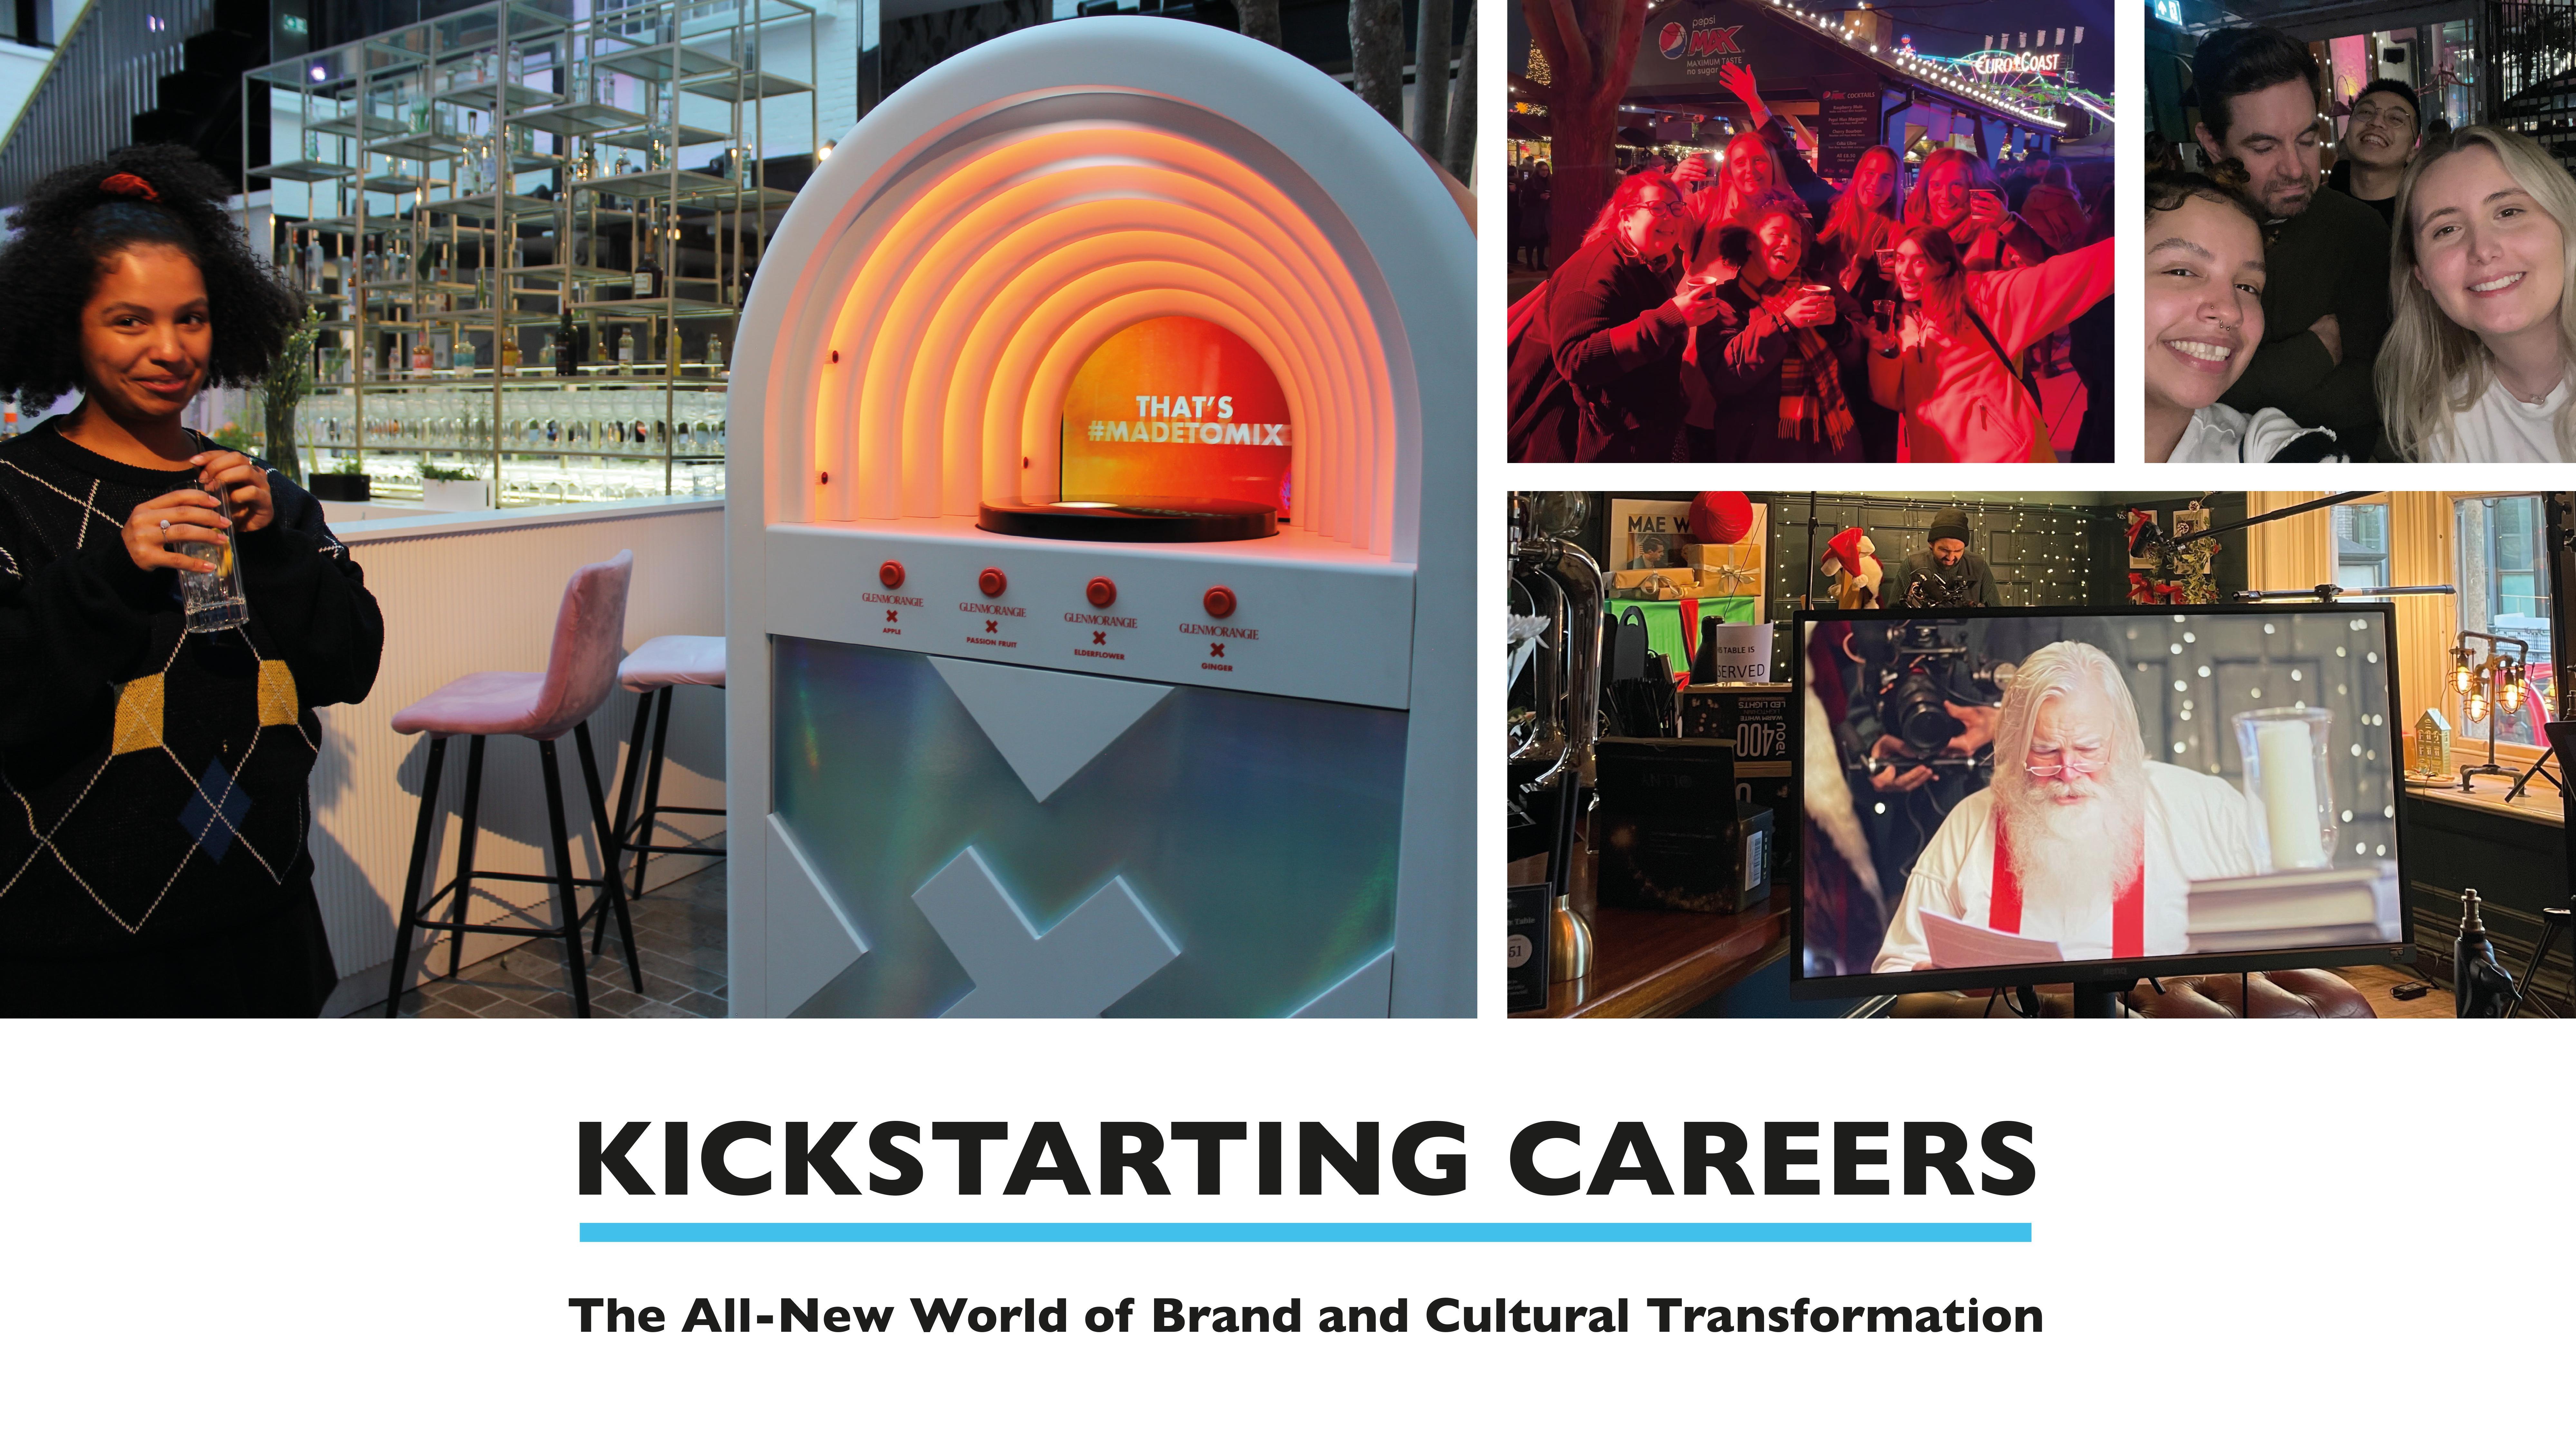 Kickstarting Careers – The All-New World of Brand and Cultural Transformation